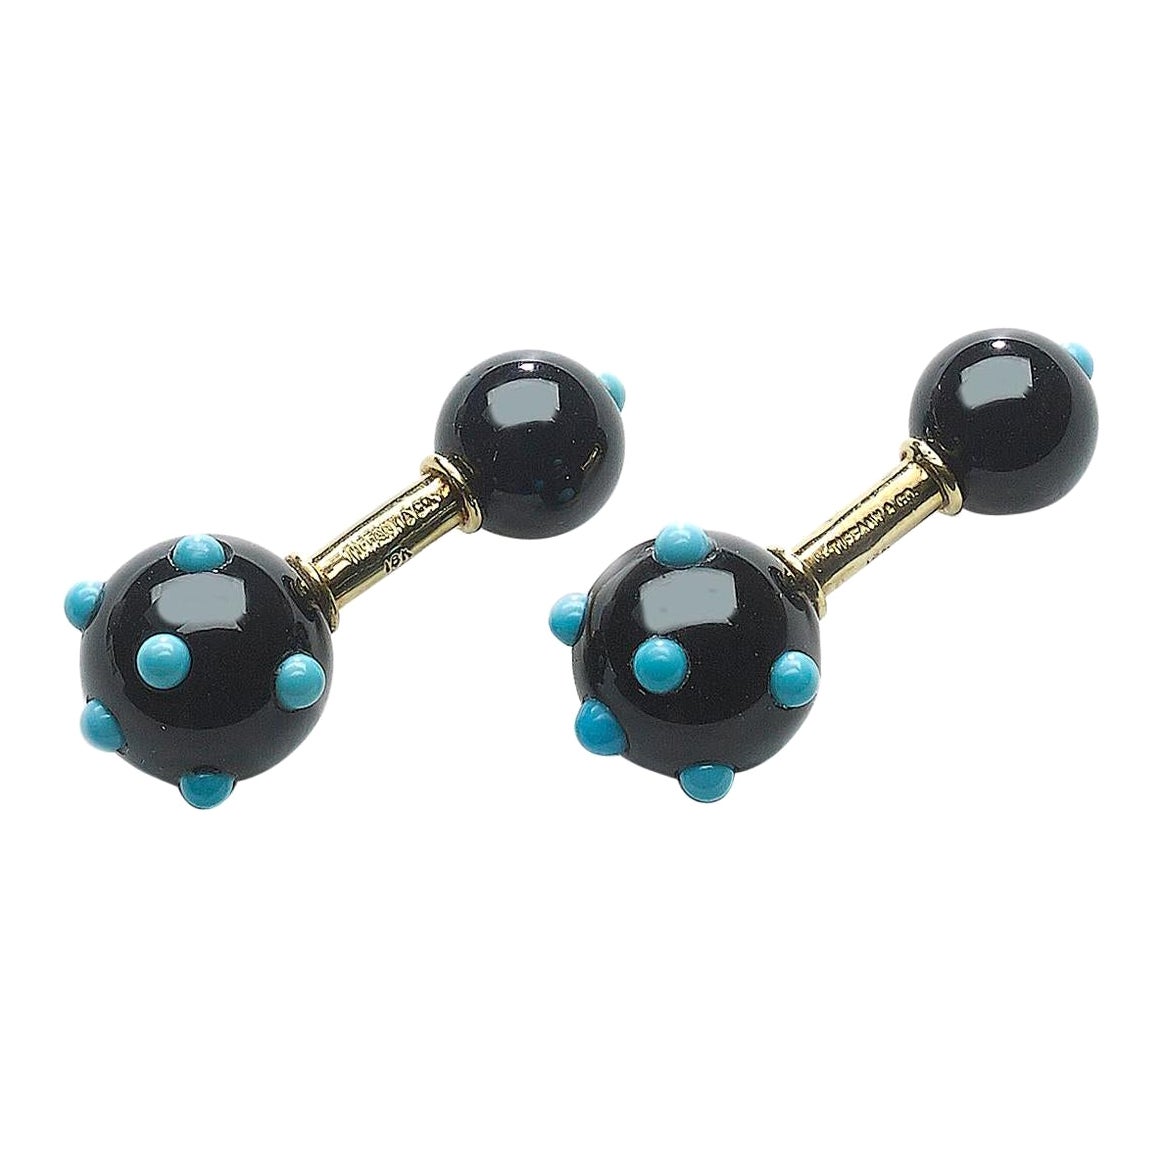 Tiffany Schlumberger Cufflinks with Black Onyx, Turquoise and Gold, Circa 1960 For Sale